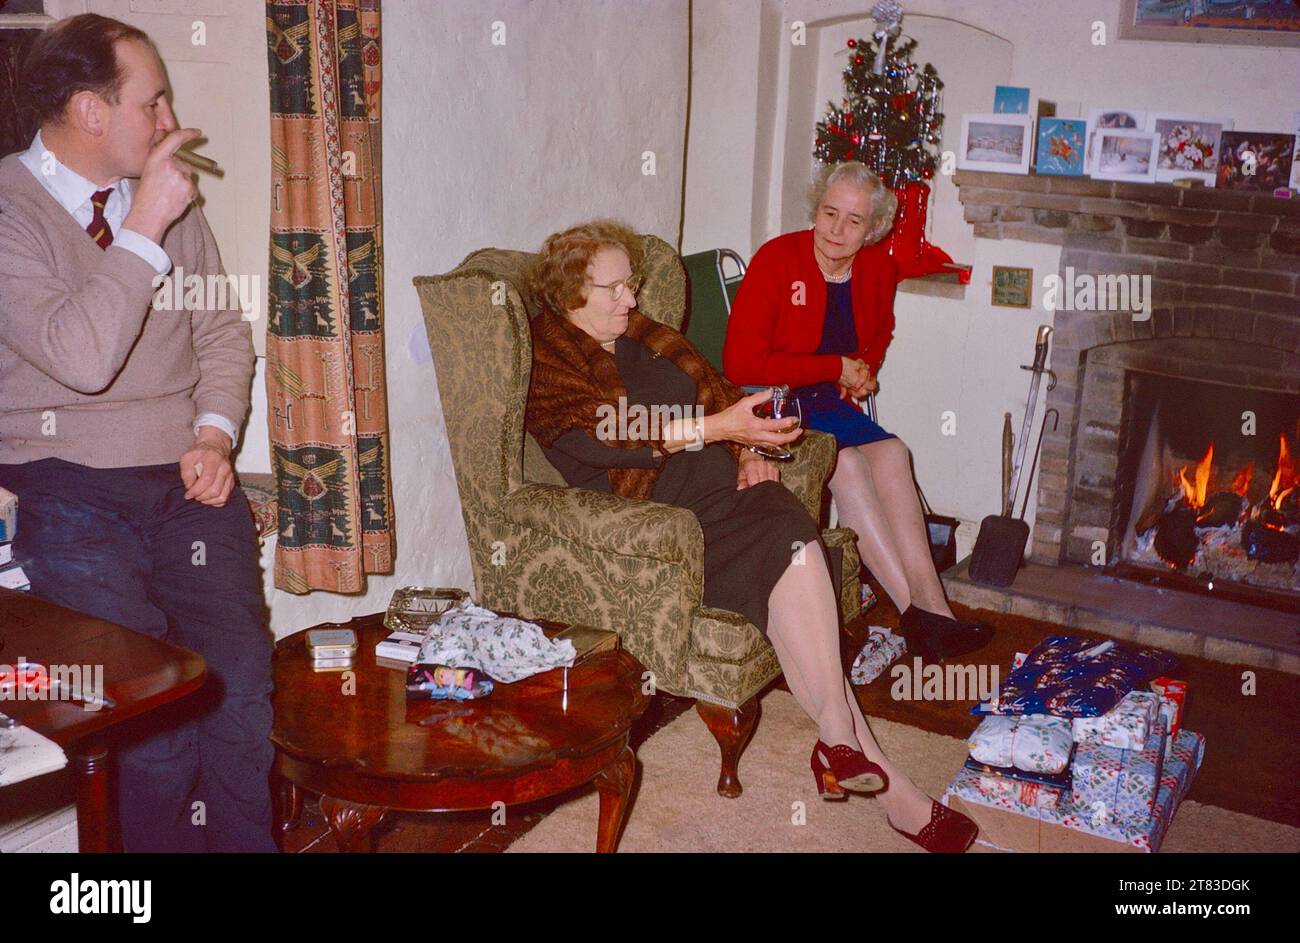 An English middle-class family group relaxing, drinking and smoking, before opening Christmas presents in 1962. Two elderly women sitting by a real log fire, one with an aperitif. A man smoking a cigar, leaning on. a window sill. A pile of Christmas presents on the floor. Christmas tree and Christmas cards in the background. Christmas before children 1960s Stock Photo